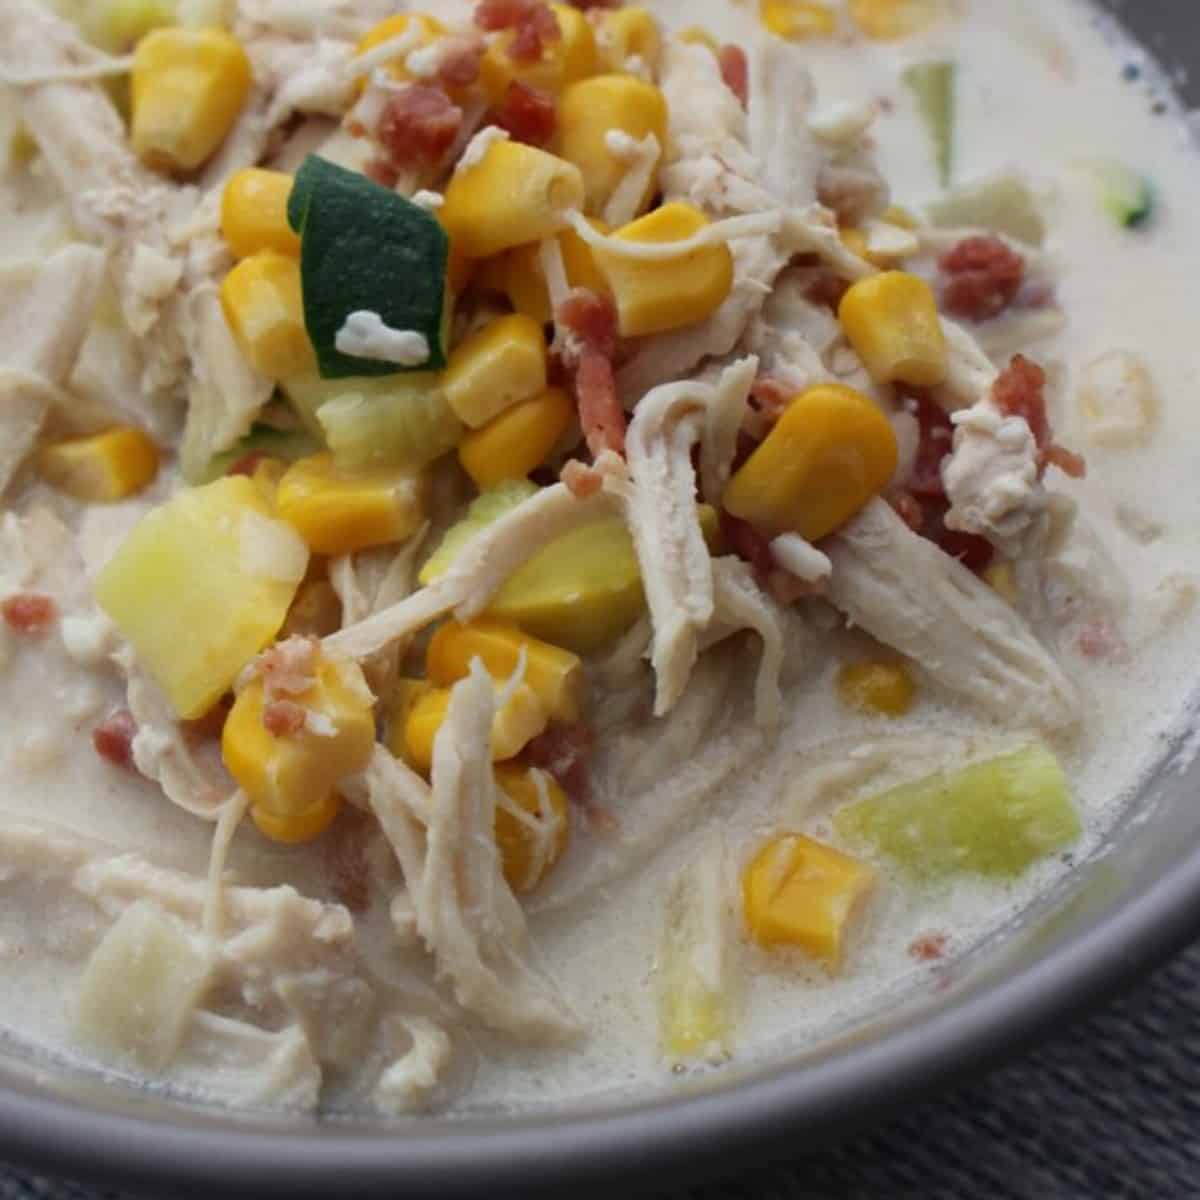 A steaming bowl of Panera Bread Summer Corn Chowder, ready to be enjoyed with a side of crusty bread